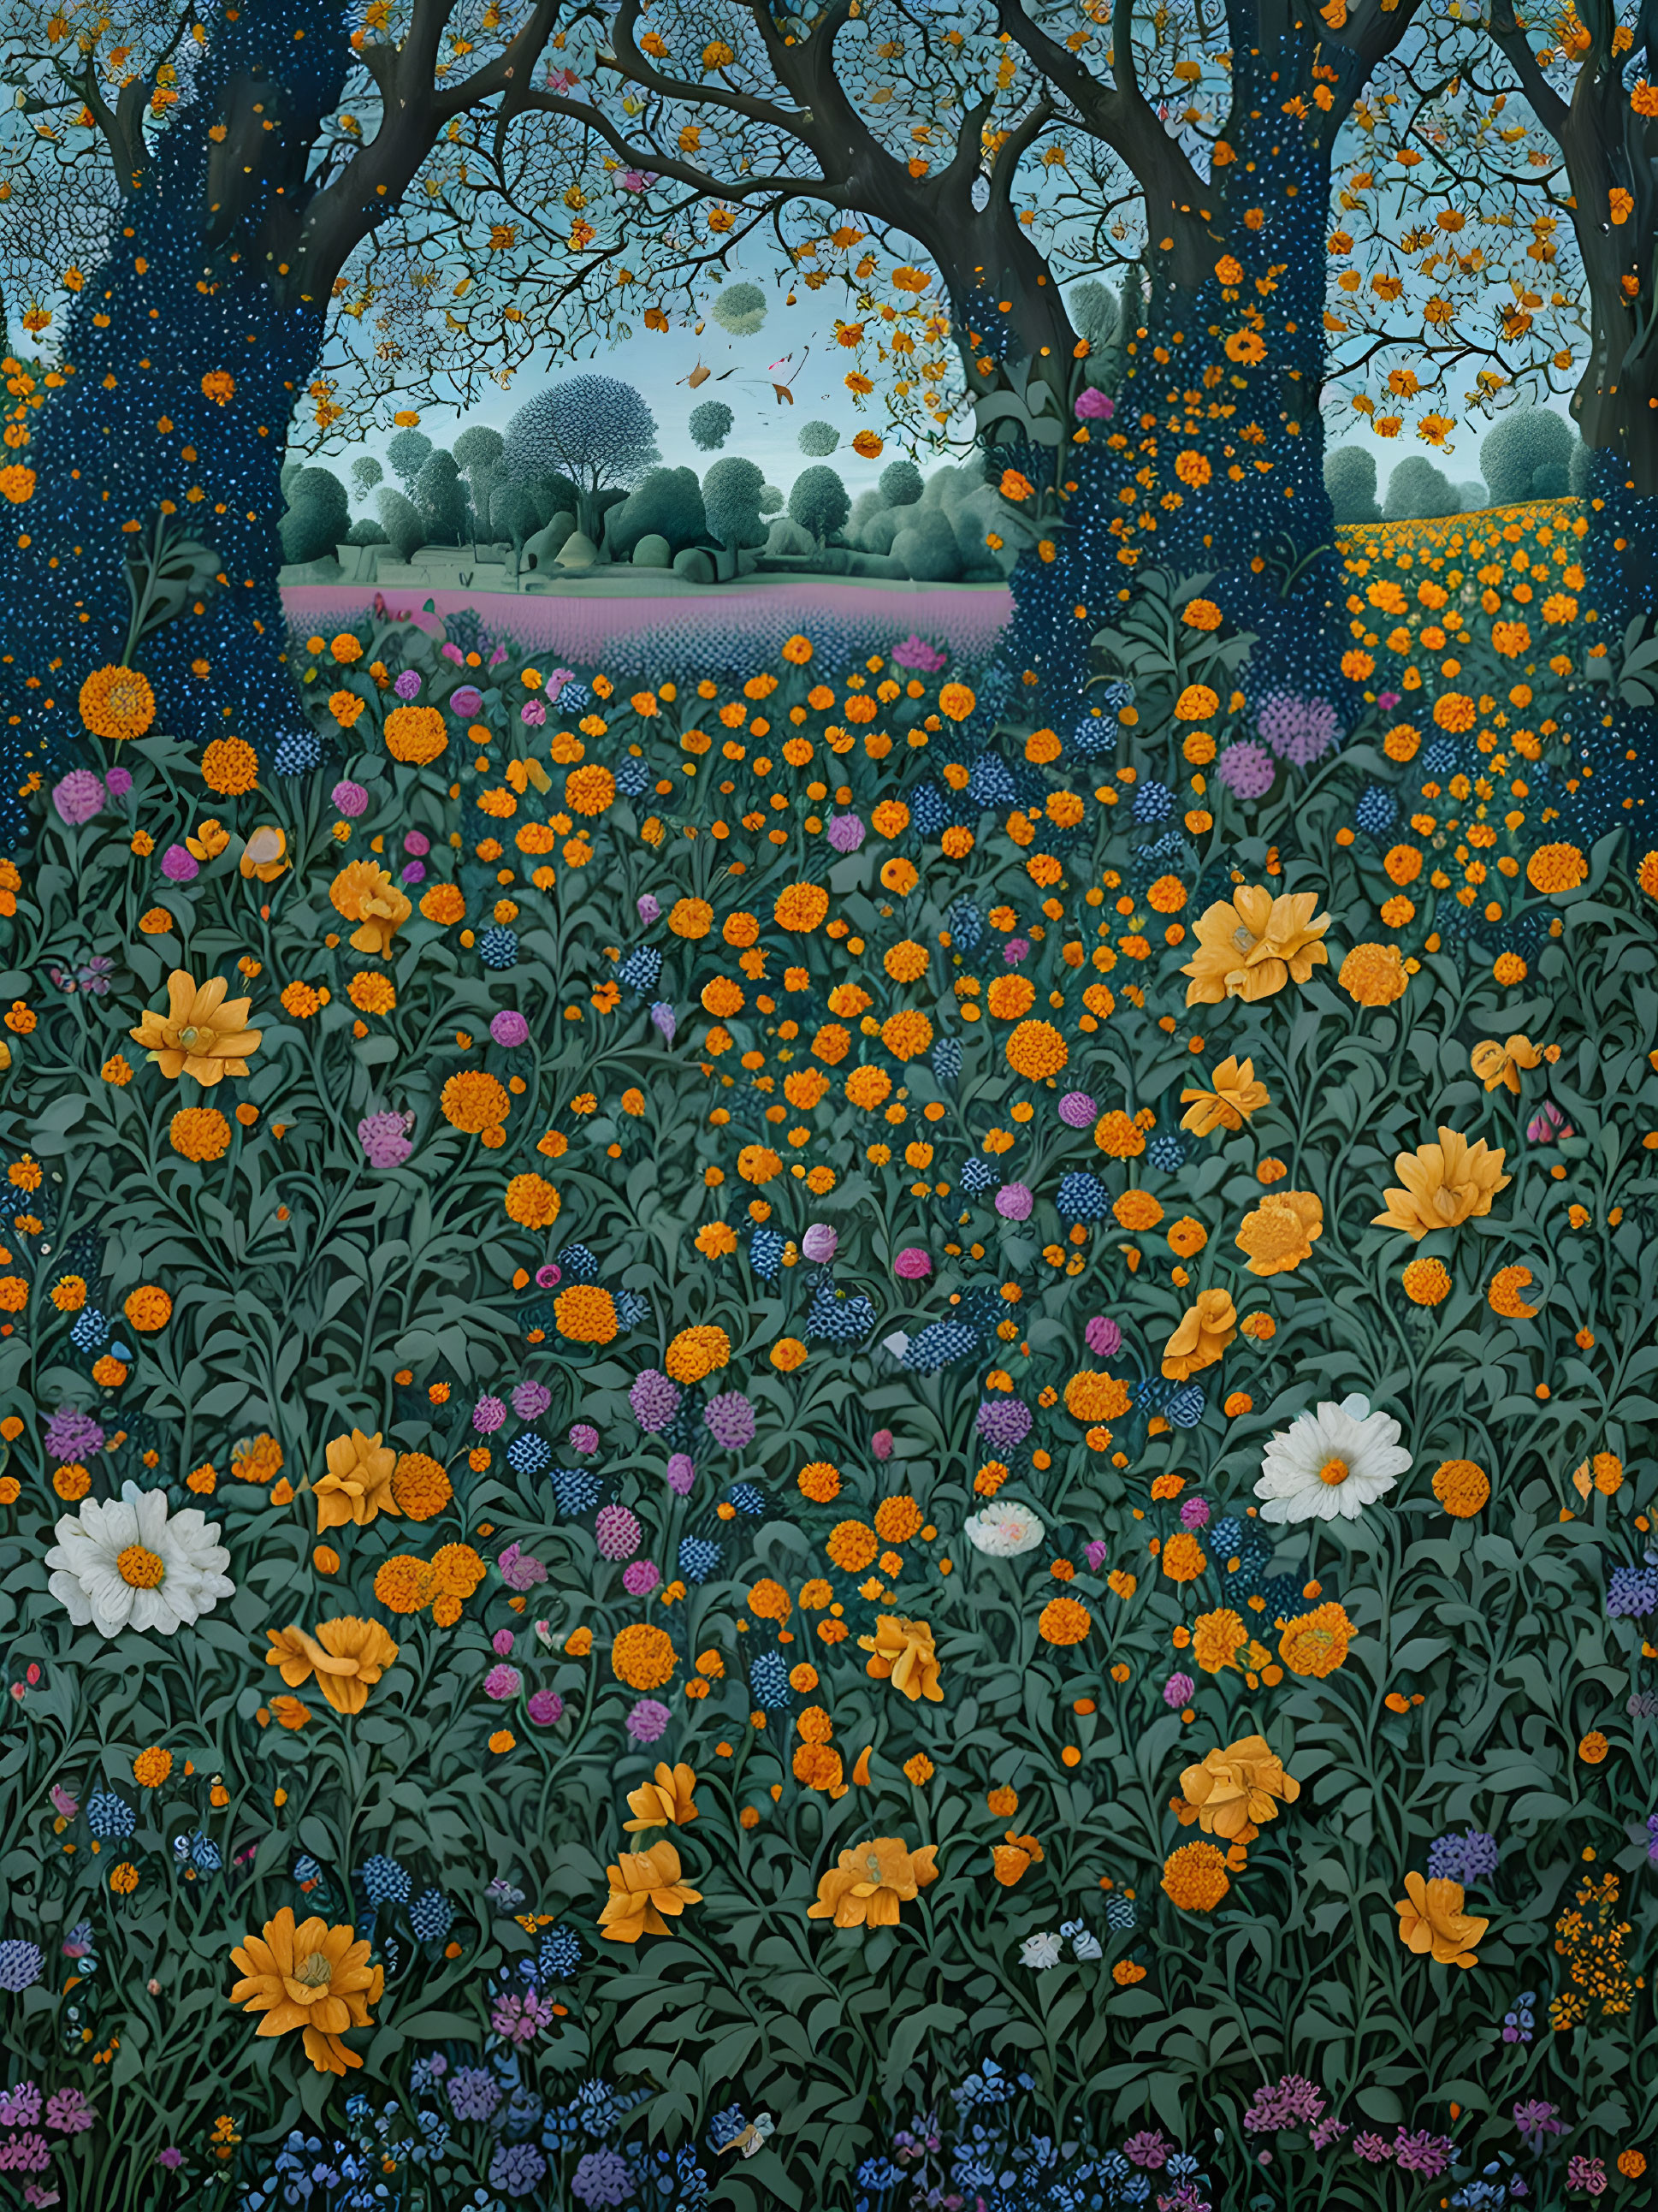 Colorful Flower Garden Illustration with Trees and Meadow Scenery